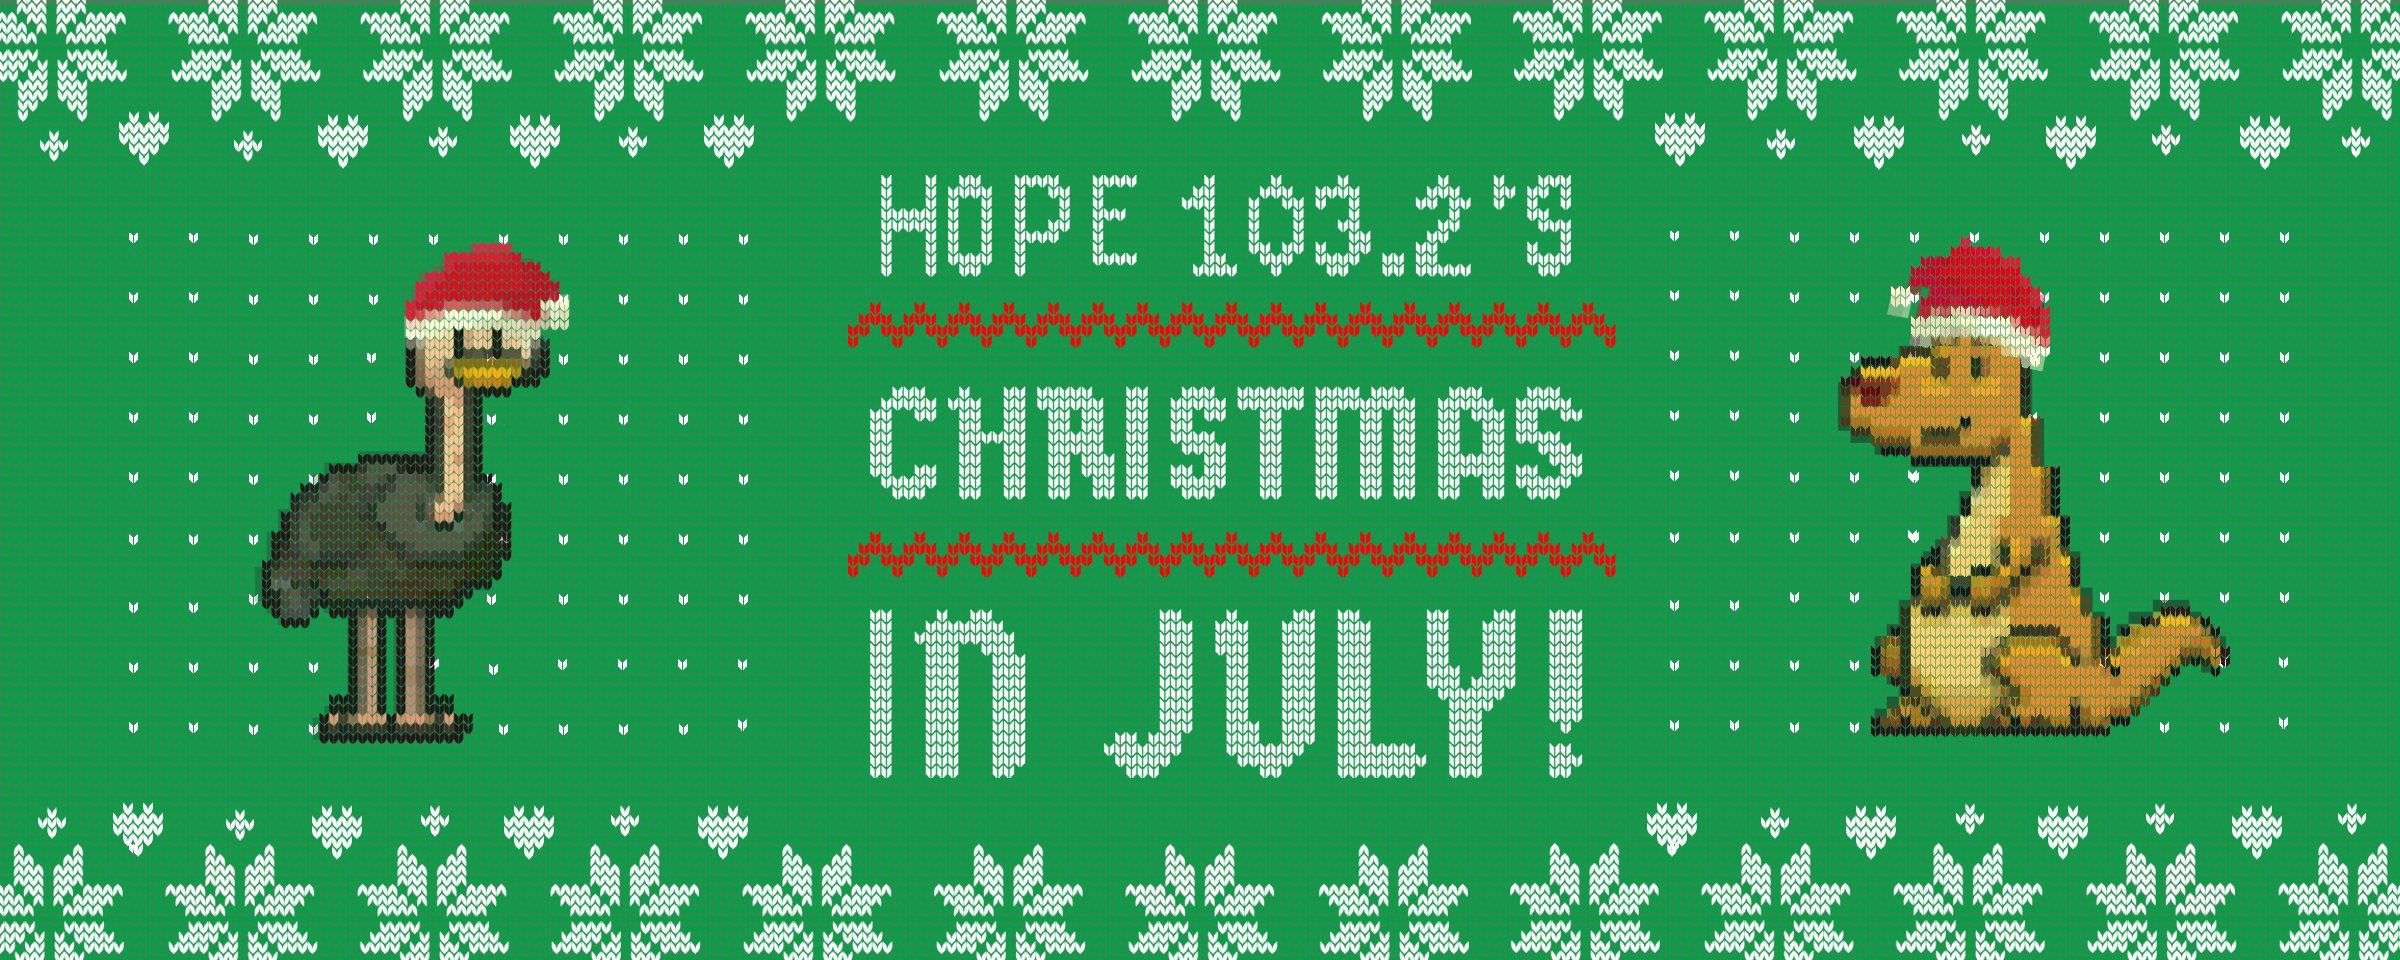 Your Christmas in July Phone Wallpaper